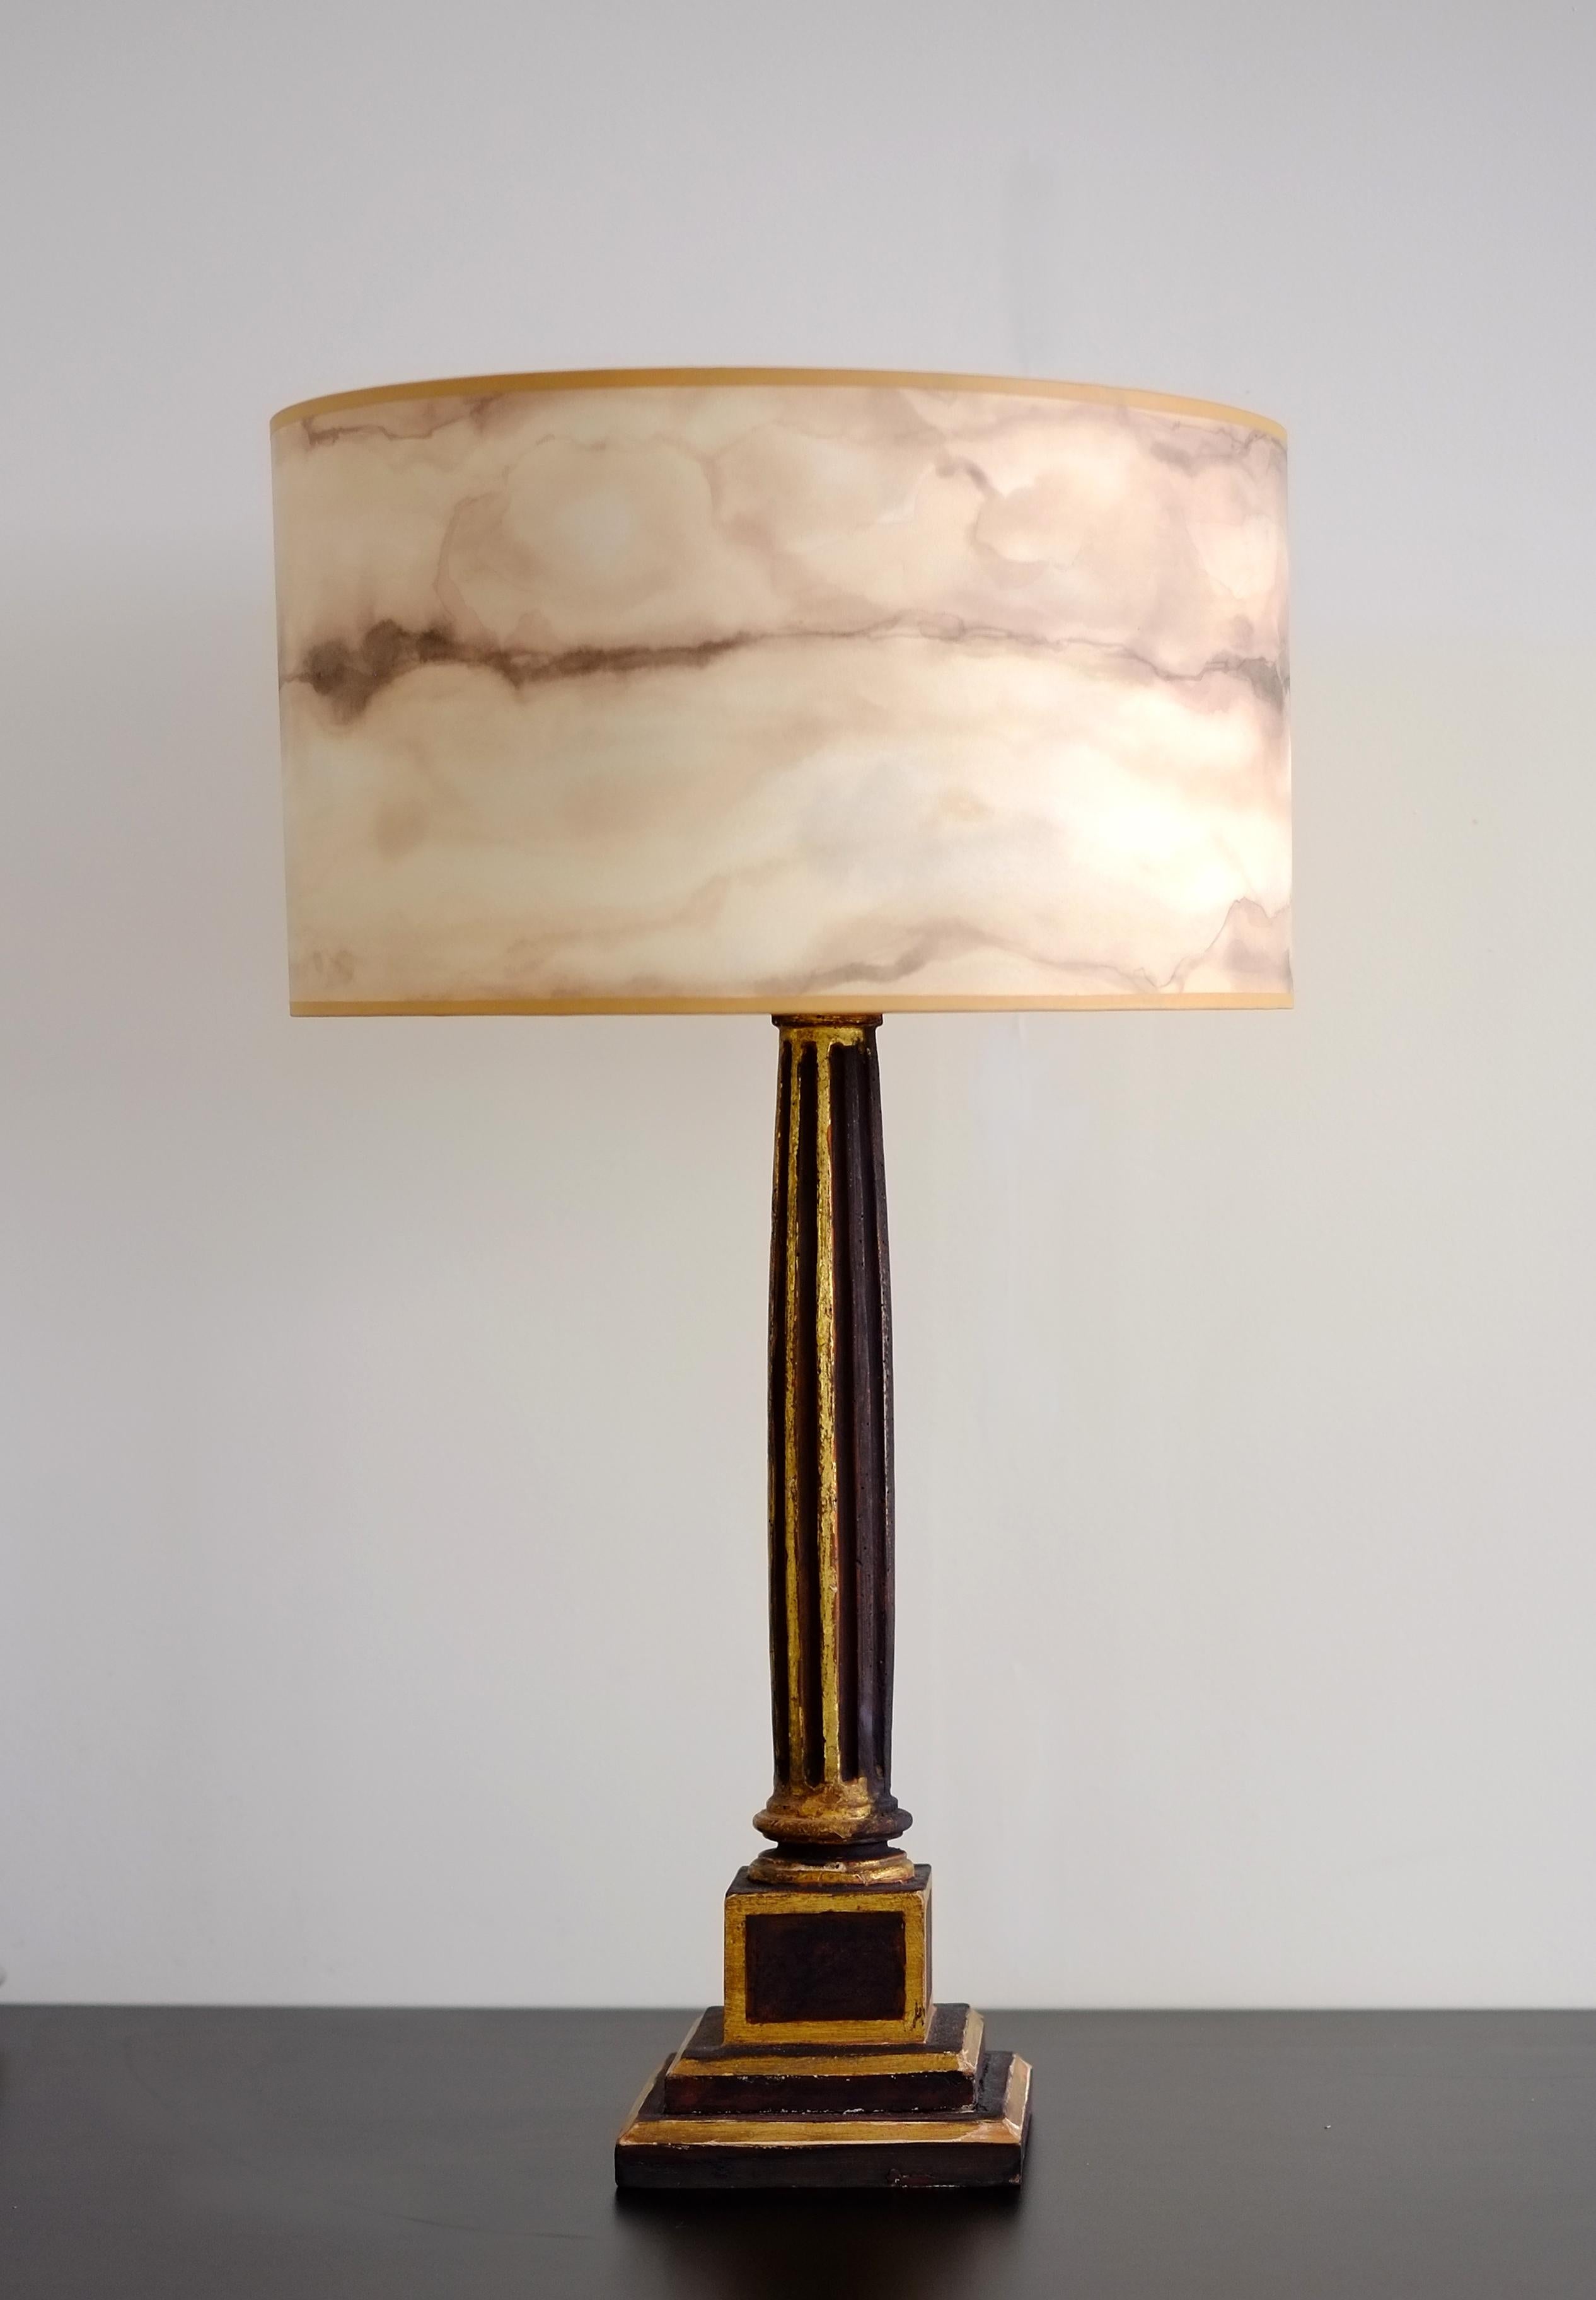 Welcome to our Lampshade Company
In BuenaVentura we produce hand-painted wallpaper. We combine sophisticated processes of handcrafted creation in order to capture the fleeting effects of nature, elegantly and luminously.
Our paintings are our own